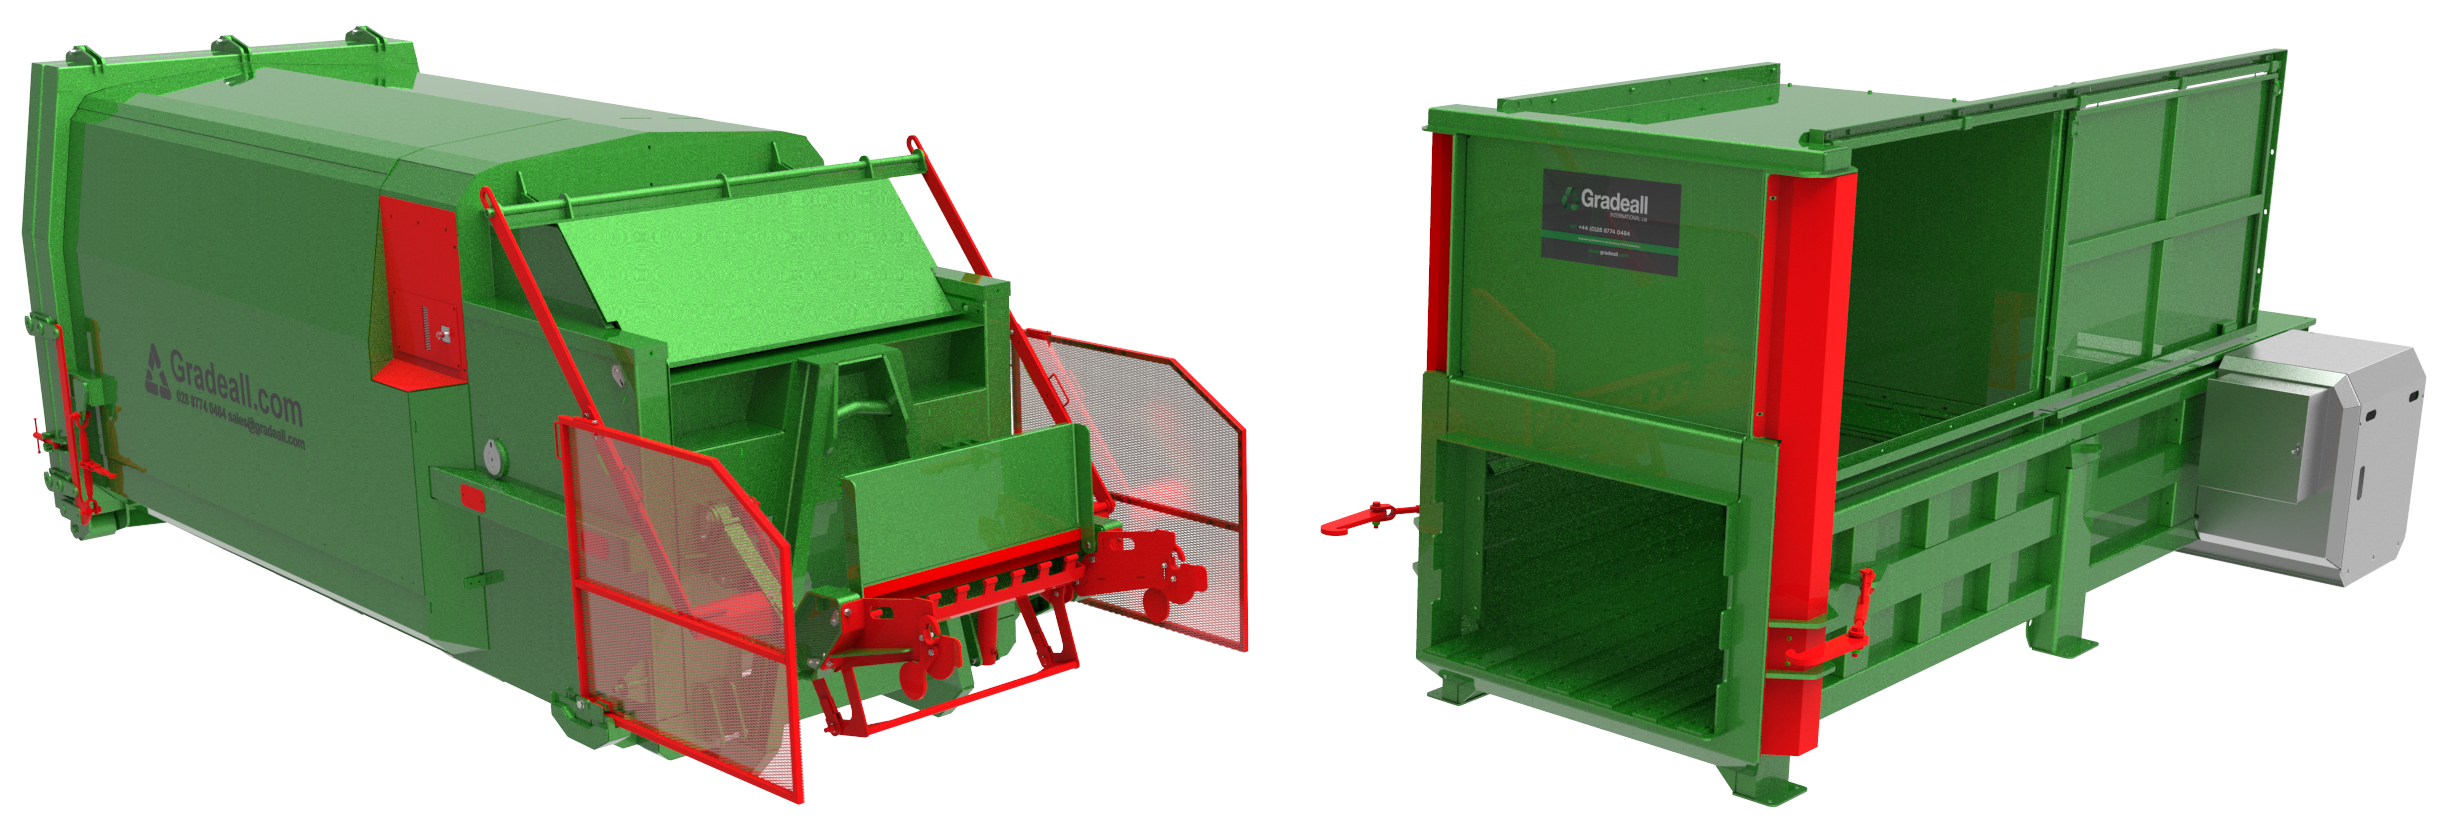 Static compactor options